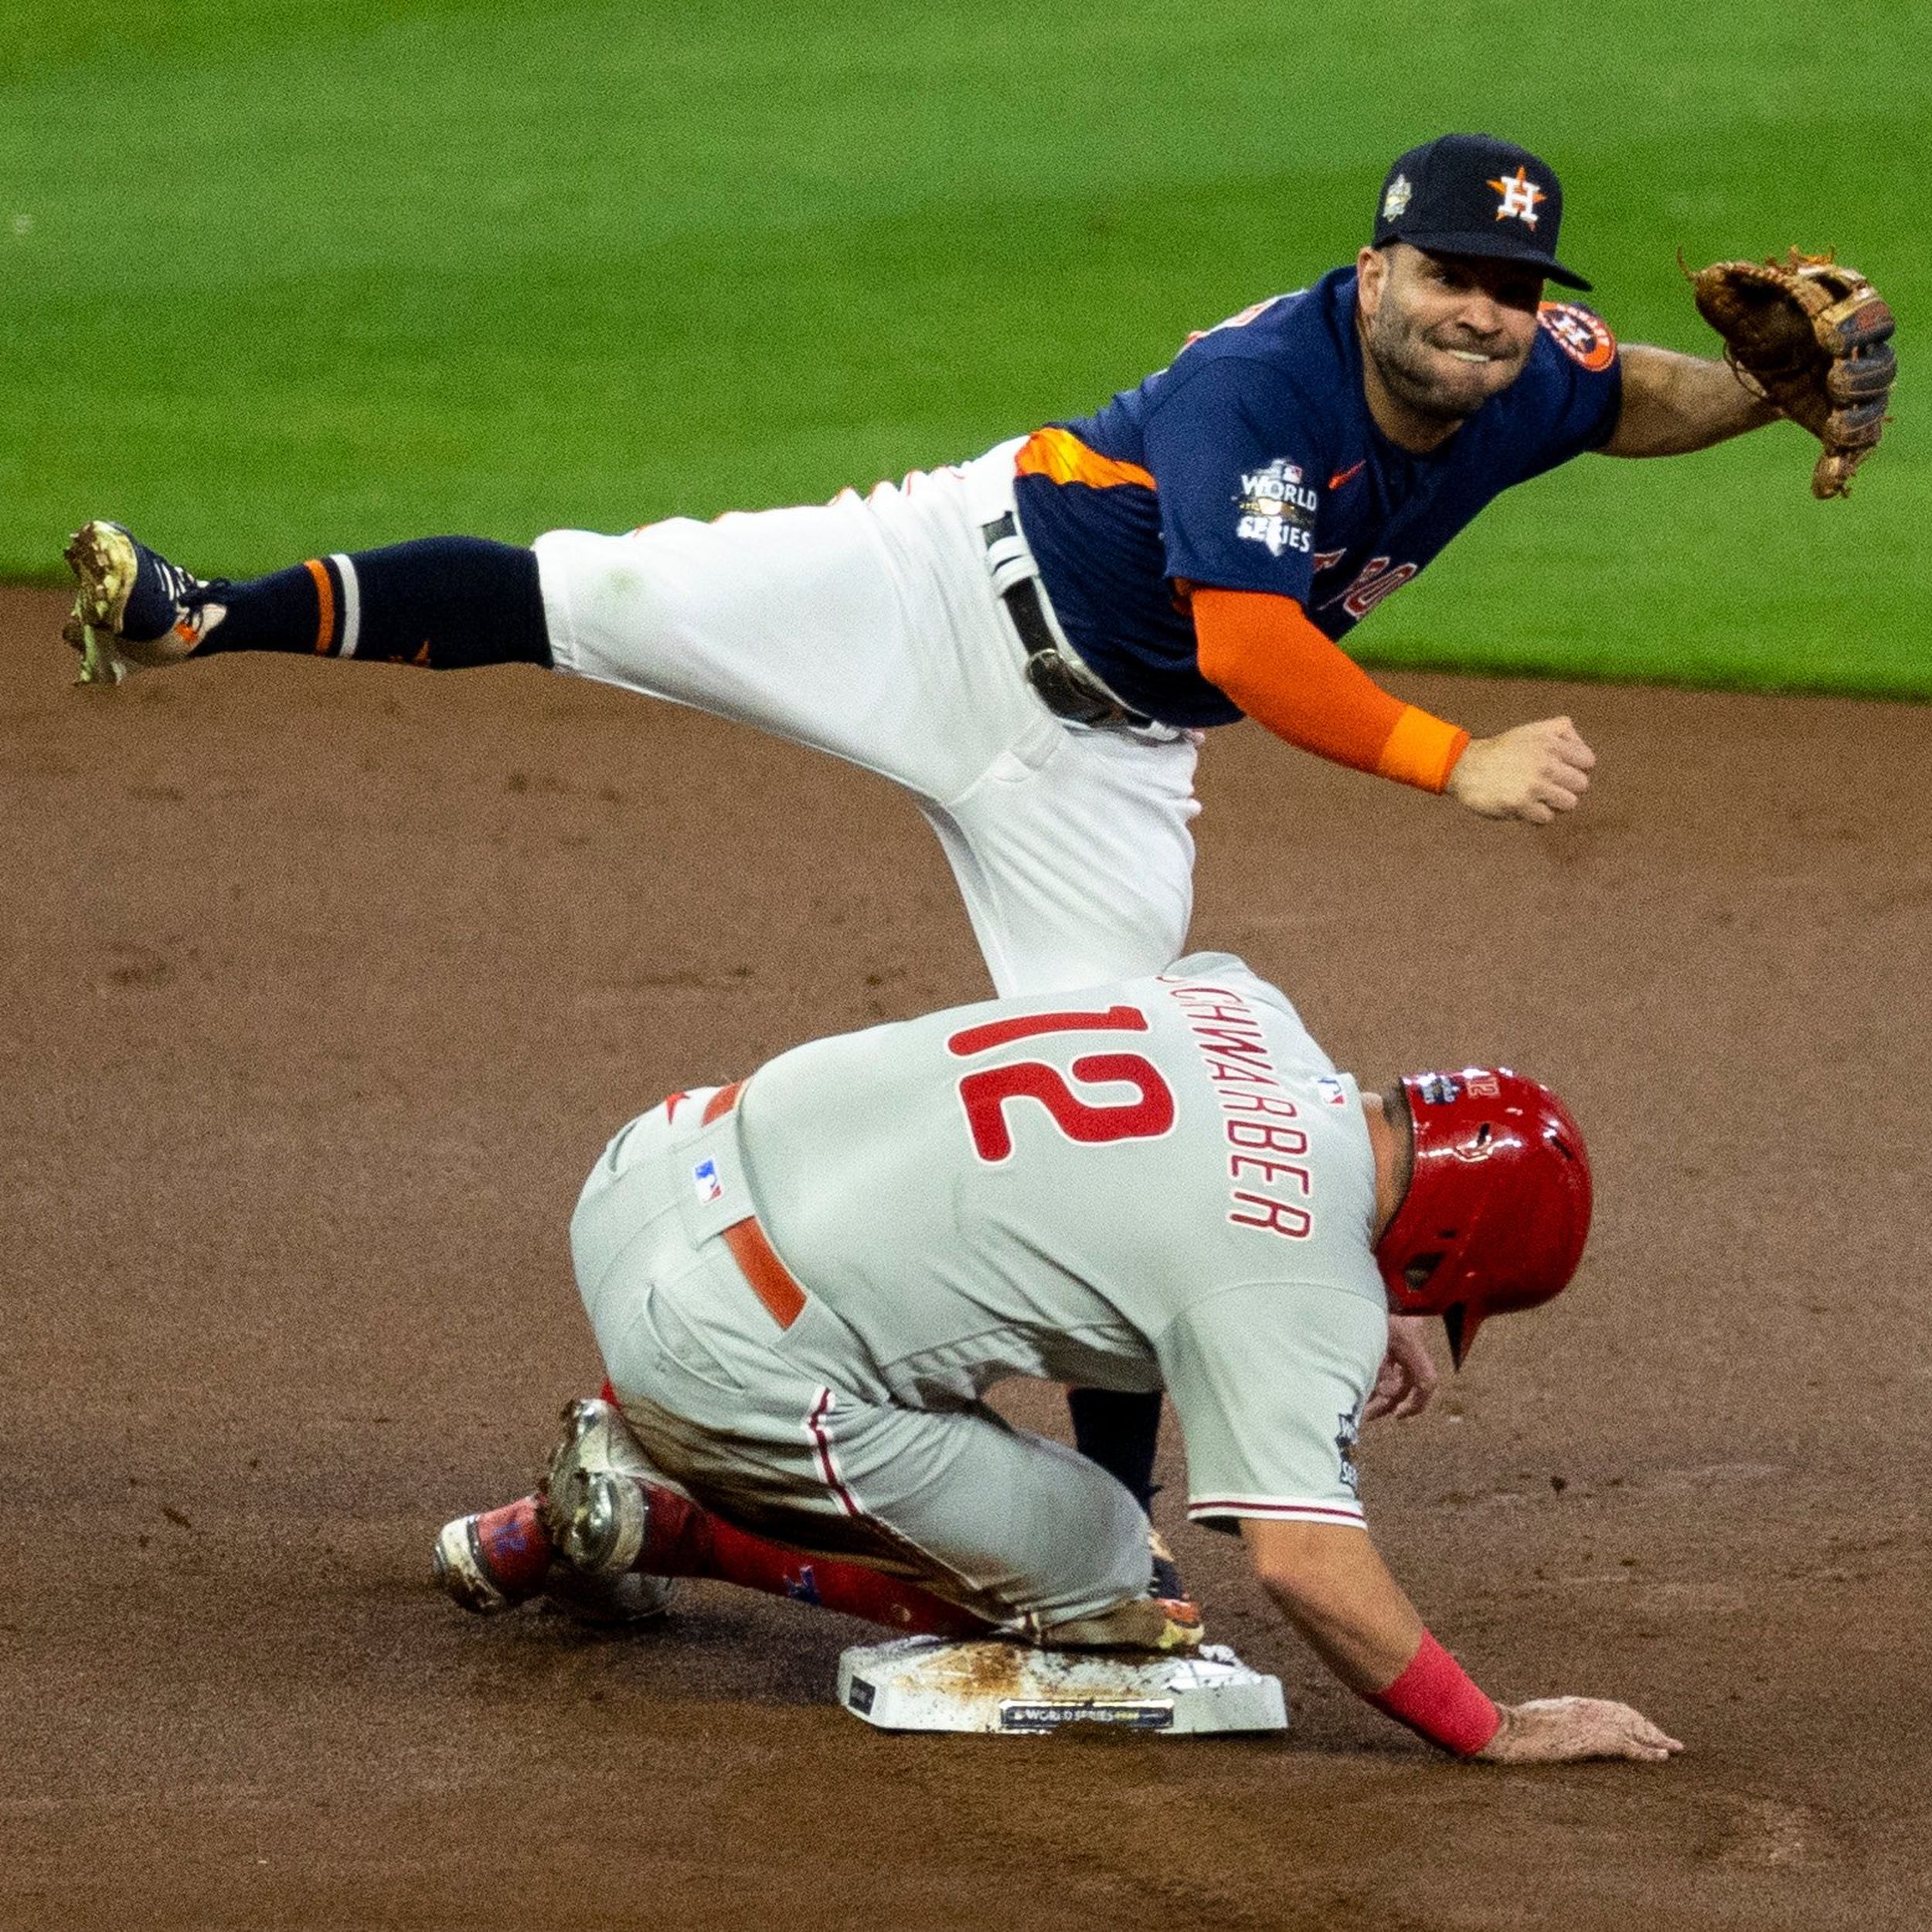 Will the Astros be forgiven for cheating if they beat the Phillies?